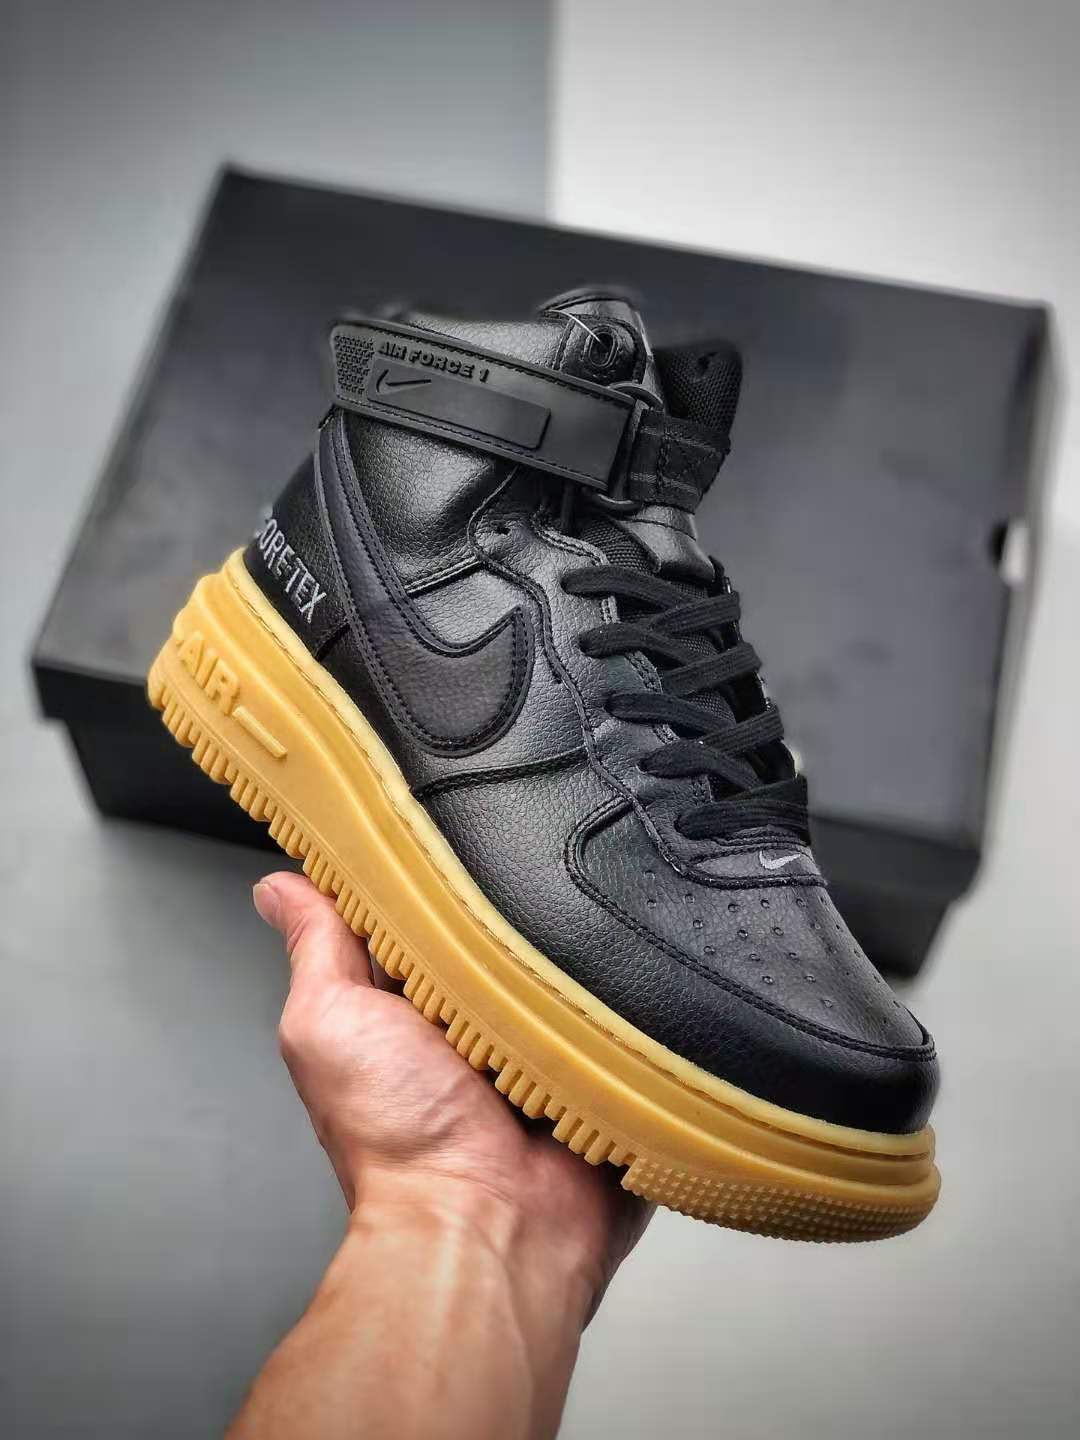 Nike Air Force 1 Gore-Tex Boot 'Black Gum' CT2815-001 - Stylish and Durable Footwear